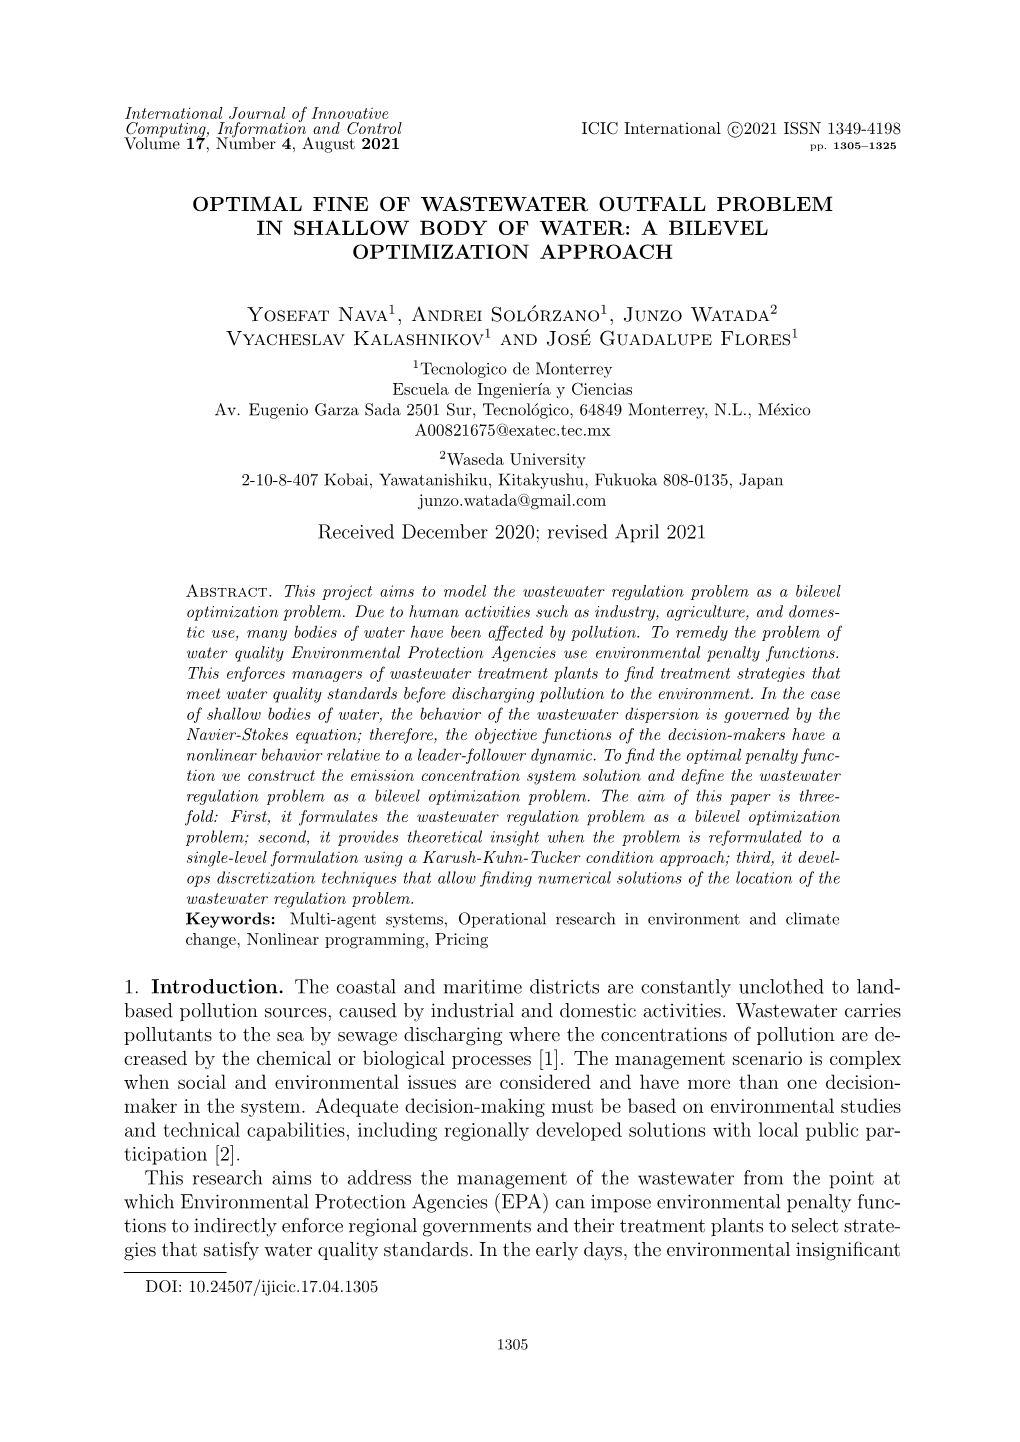 Optimal Fine of Wastewater Outfall Problem in Shallow Body of Water: a Bilevel Optimization Approach